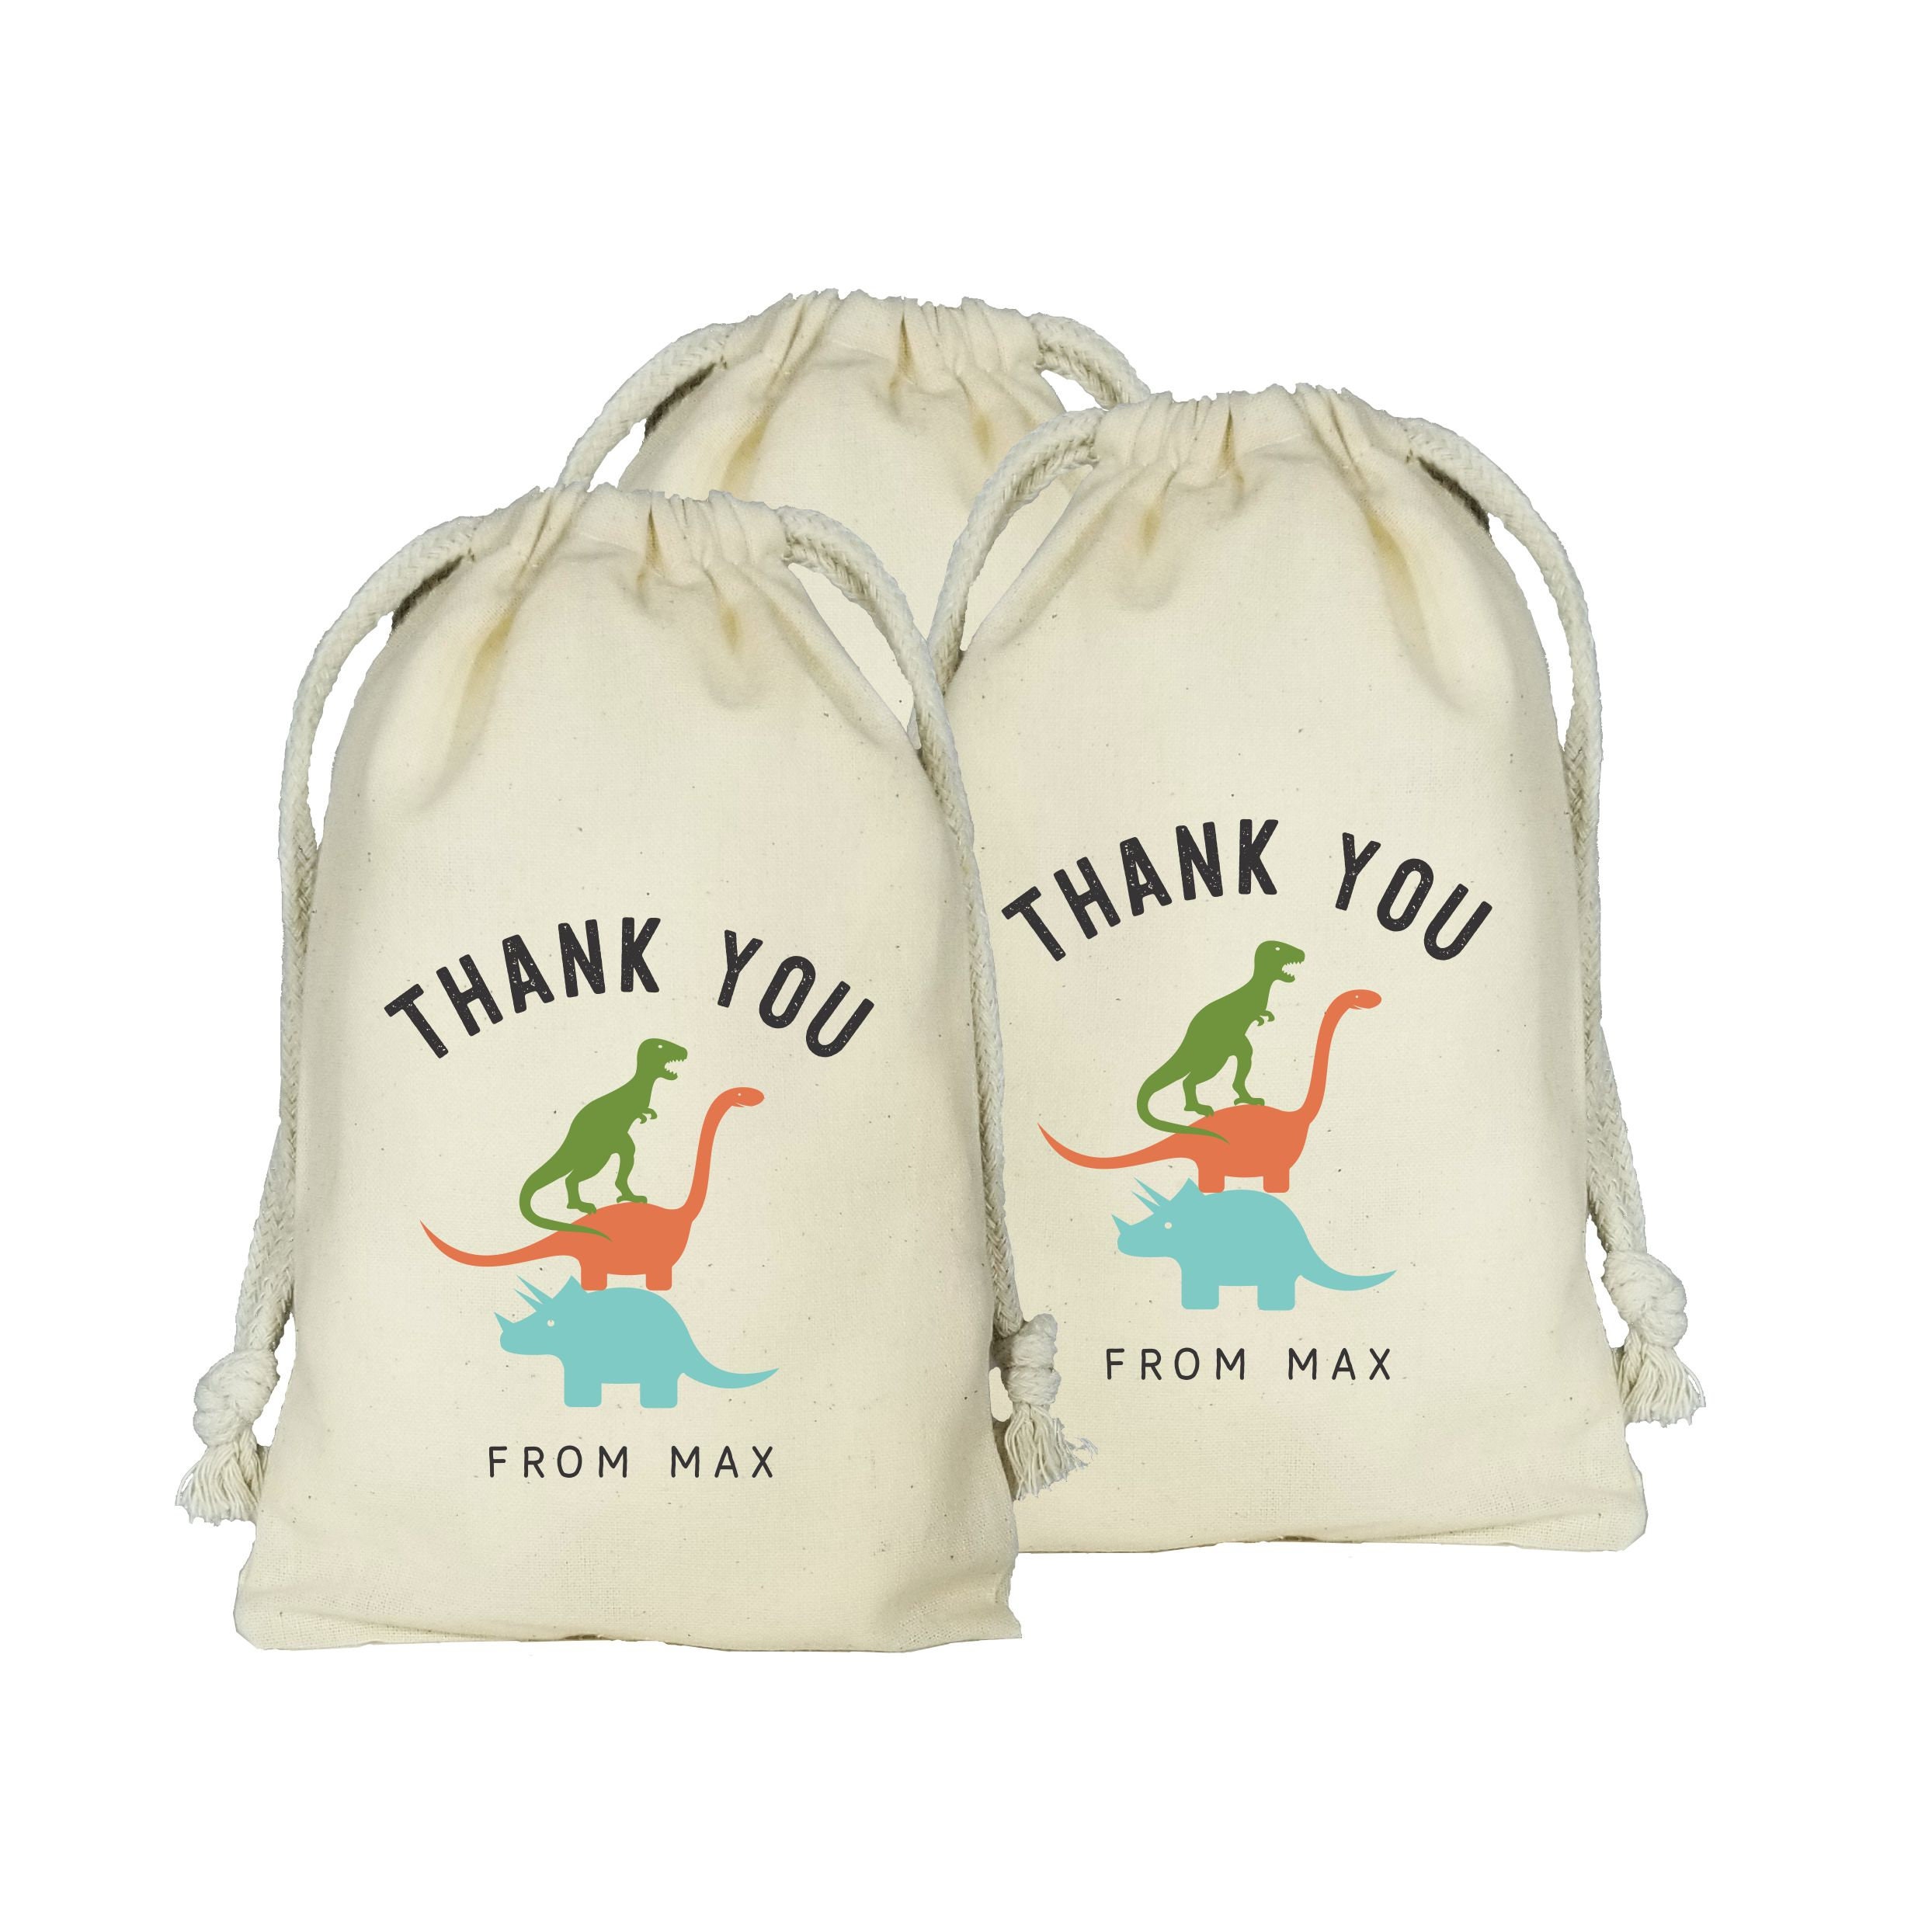 Dinosaur Party Favor: Dinosaur Party Bag Filled With Play Doh and